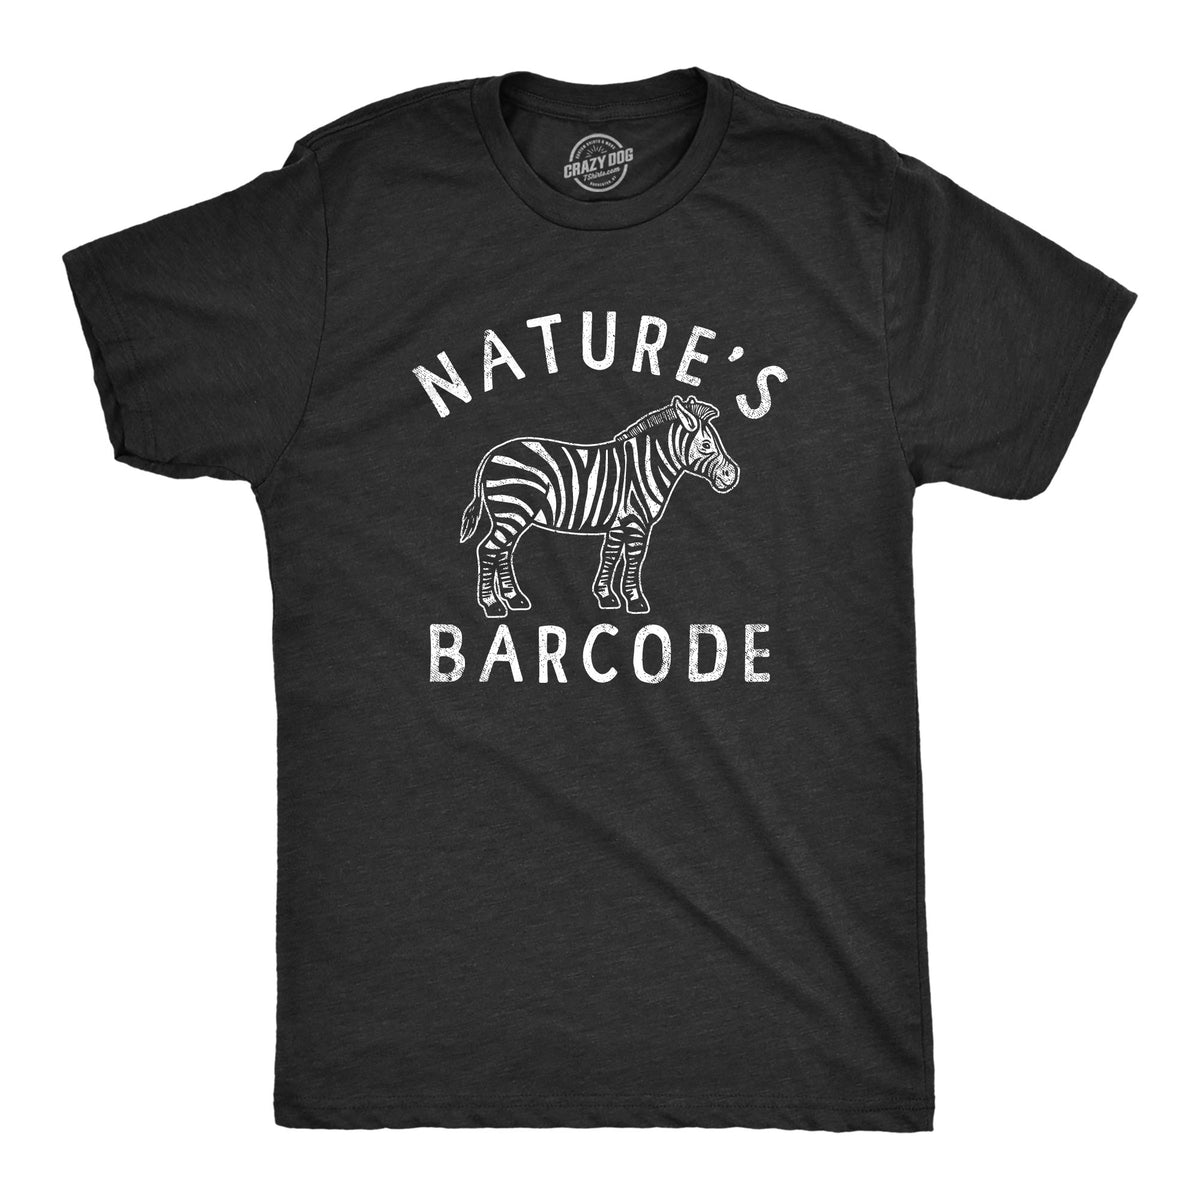 Funny Heather Black - BARCODE Natures Barcode Mens T Shirt Nerdy Animal sarcastic Tee